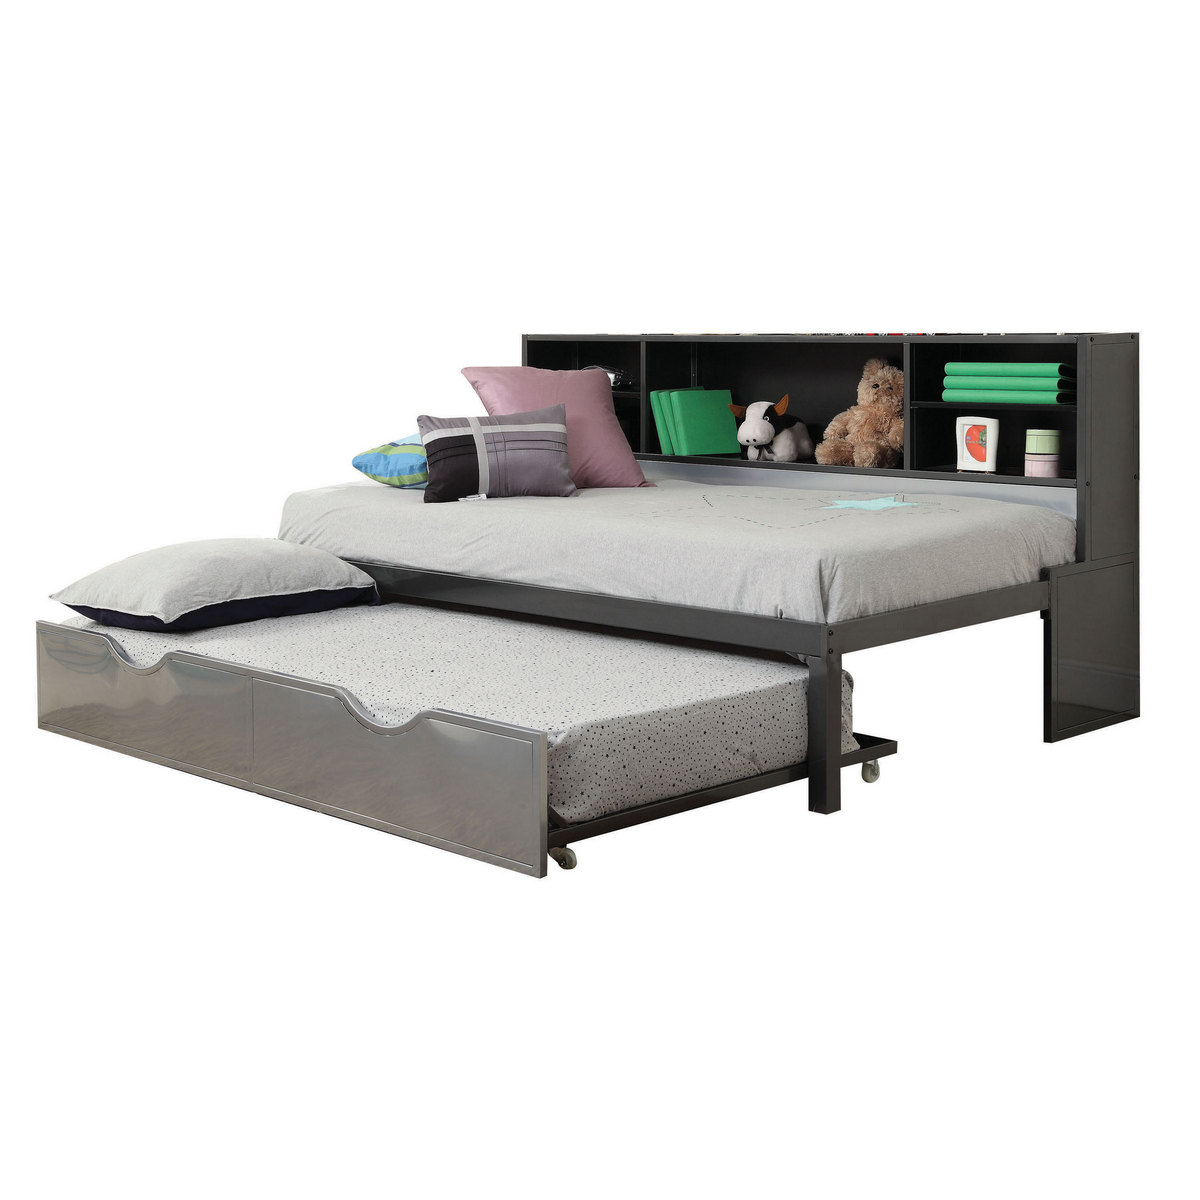 Acme Furniture Twin Bed Bookcase Trundle